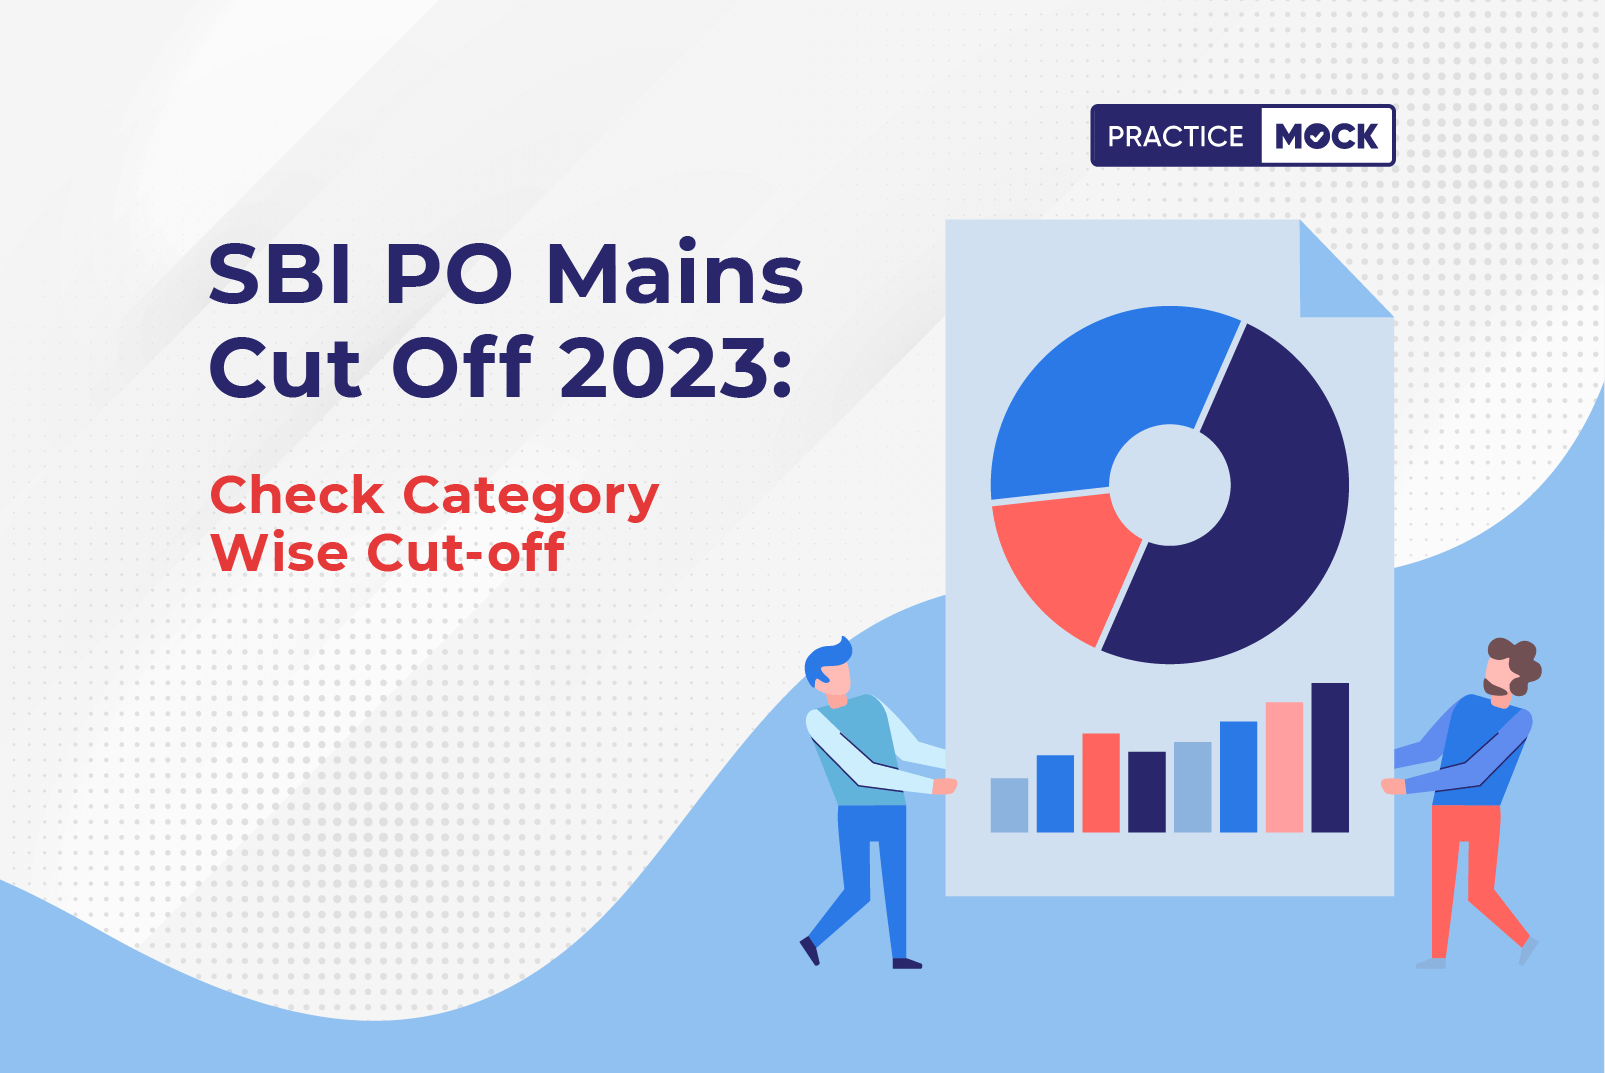 SBI PO Mains Cut Off 2023 Check Category Wise Cut-off